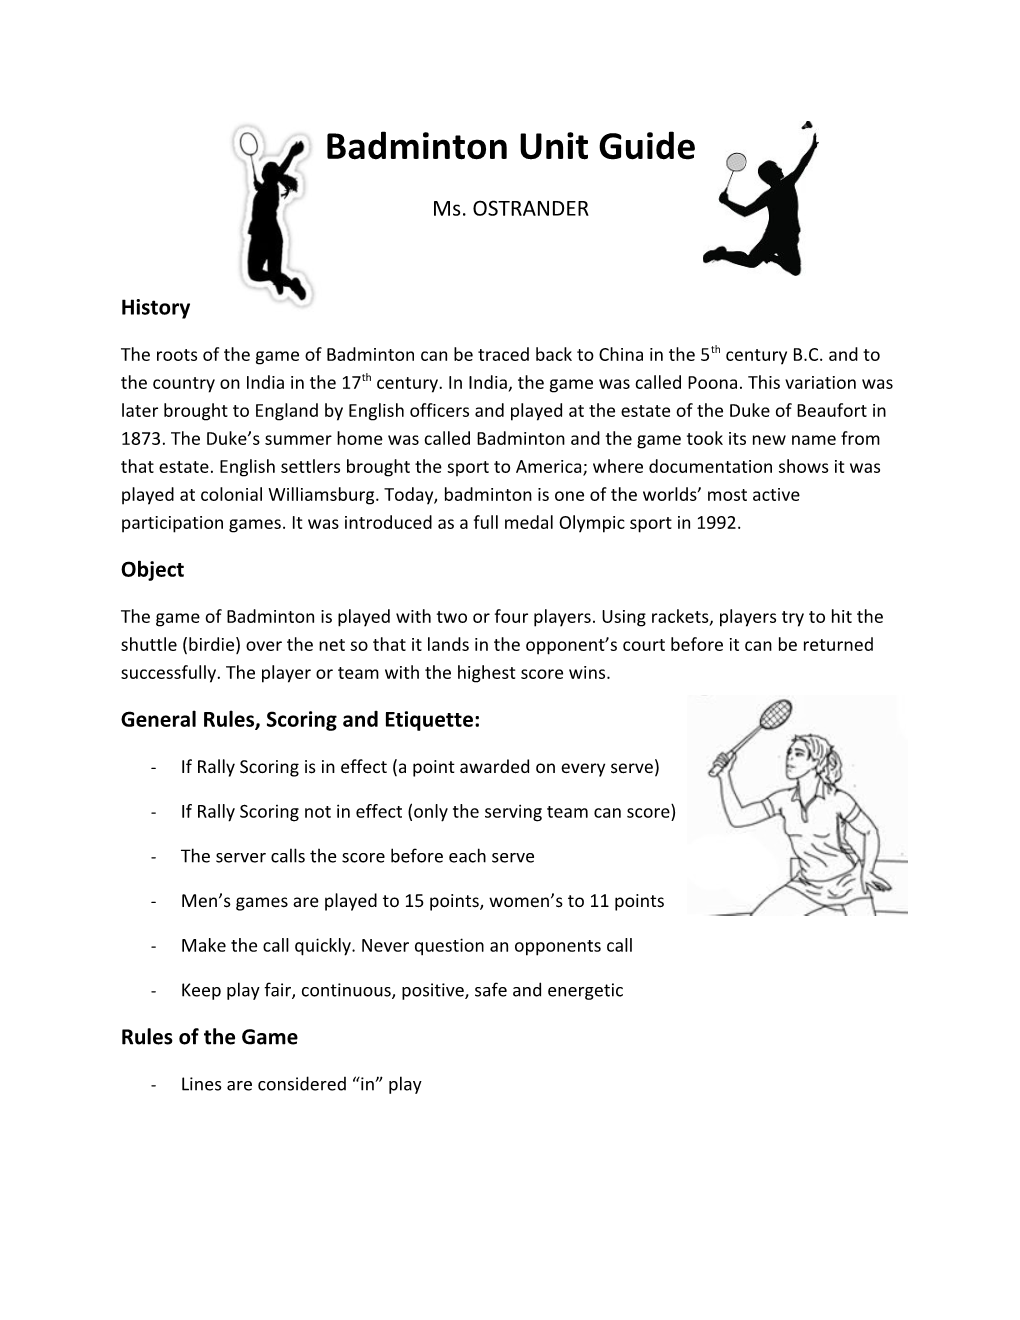 General Rules, Scoring and Etiquette